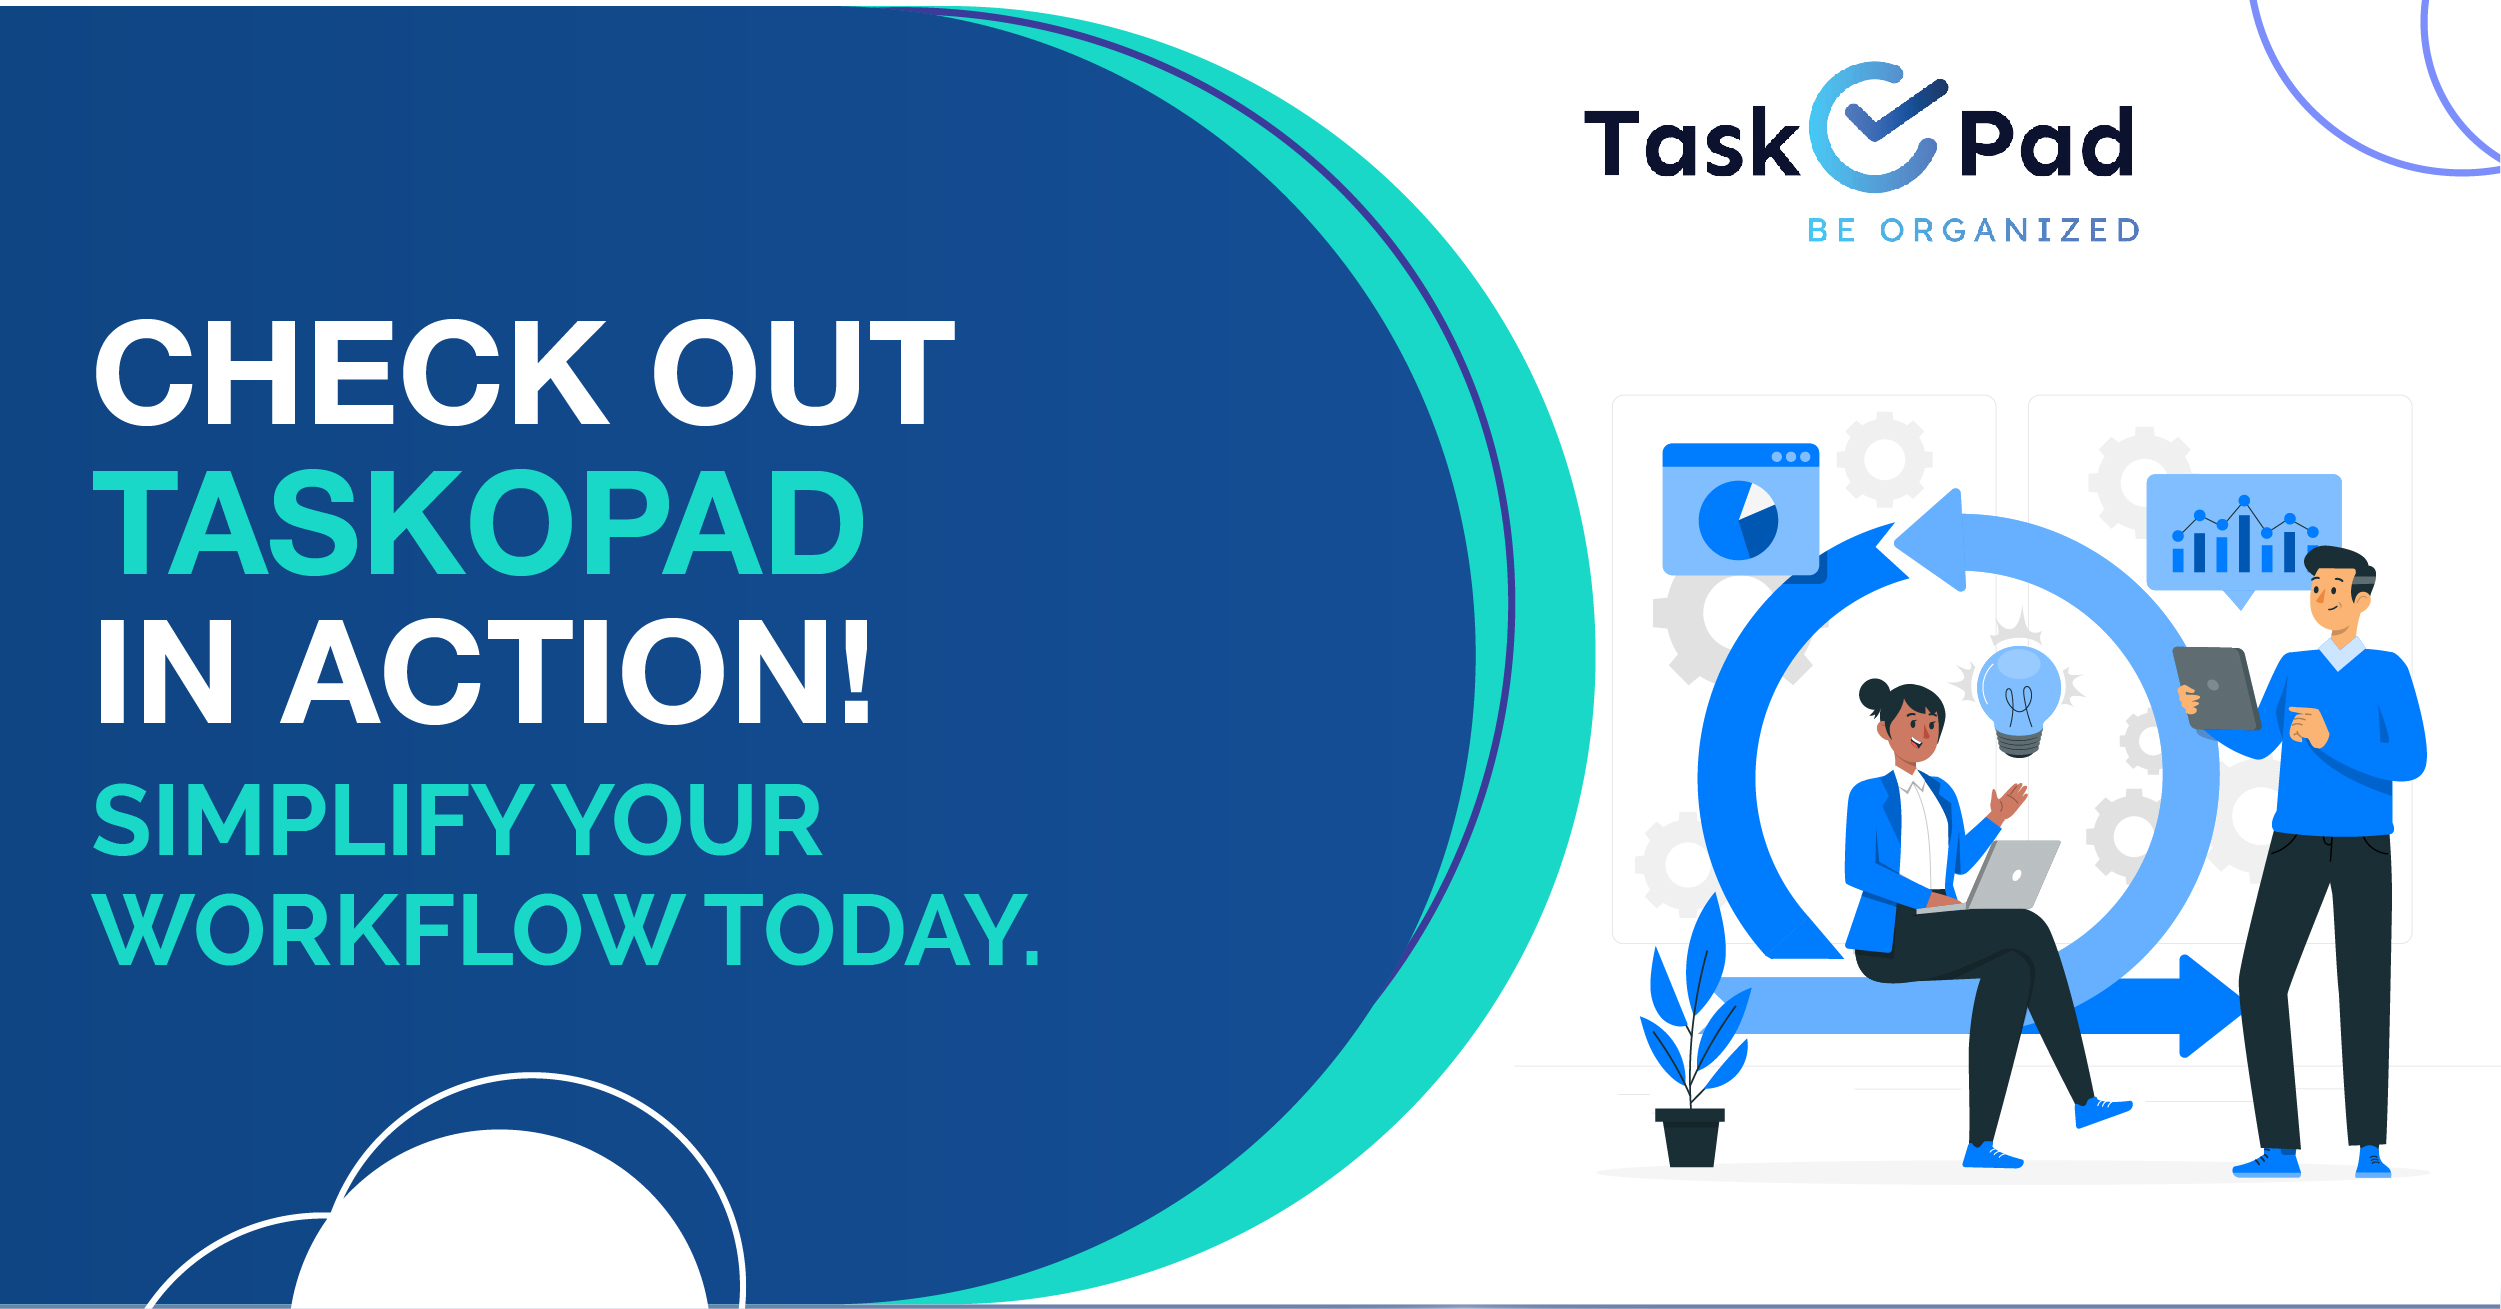 Check out Taskopad in action! Simplify your workflow today.